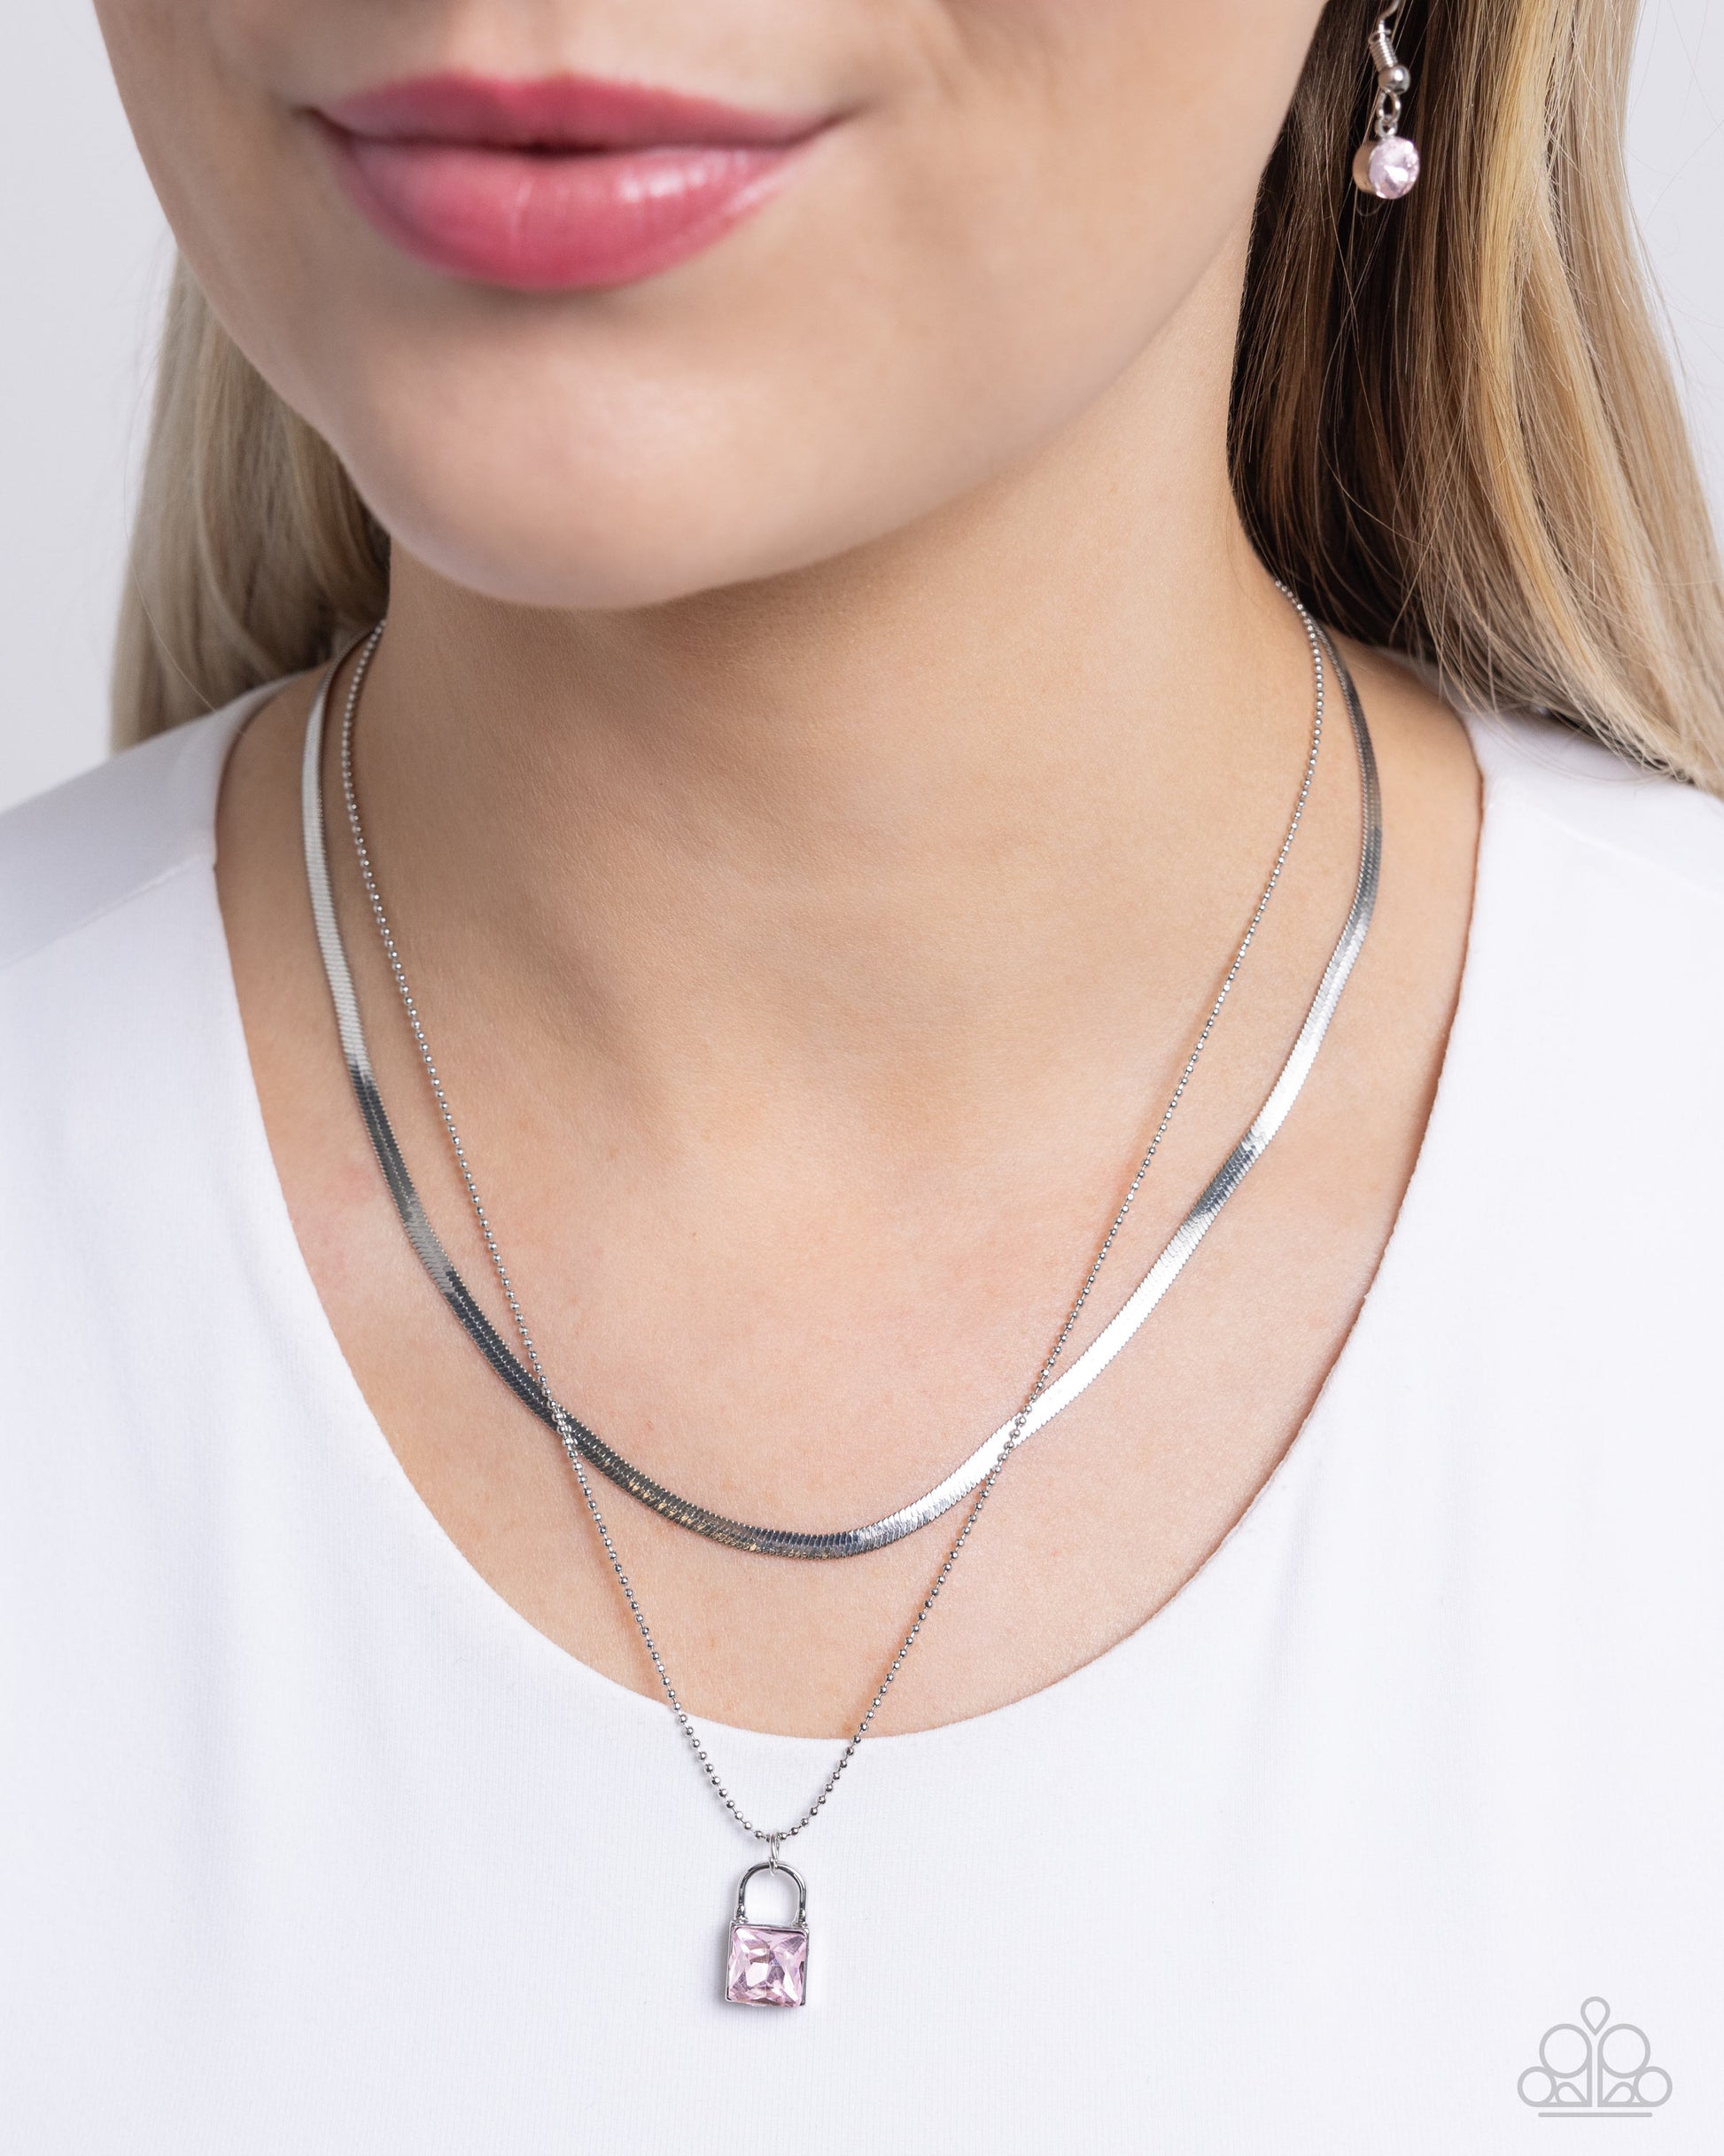 <p data-mce-fragment="1">Pressed in a silver padlock pendant, a square pink gem glistens and glides along a dainty silver ball chain. Layered above the gritty glittery display, a silver herringbone chain creates additional edge and detail. Features an adjustable clasp closure.</p> <p data-mce-fragment="1"><i data-mce-fragment="1">Sold as one individual necklace. Includes one pair of matching earrings.</i></p> <p data-mce-fragment="1"><i data-mce-fragment="1">Order date 4/20/24</i></p>